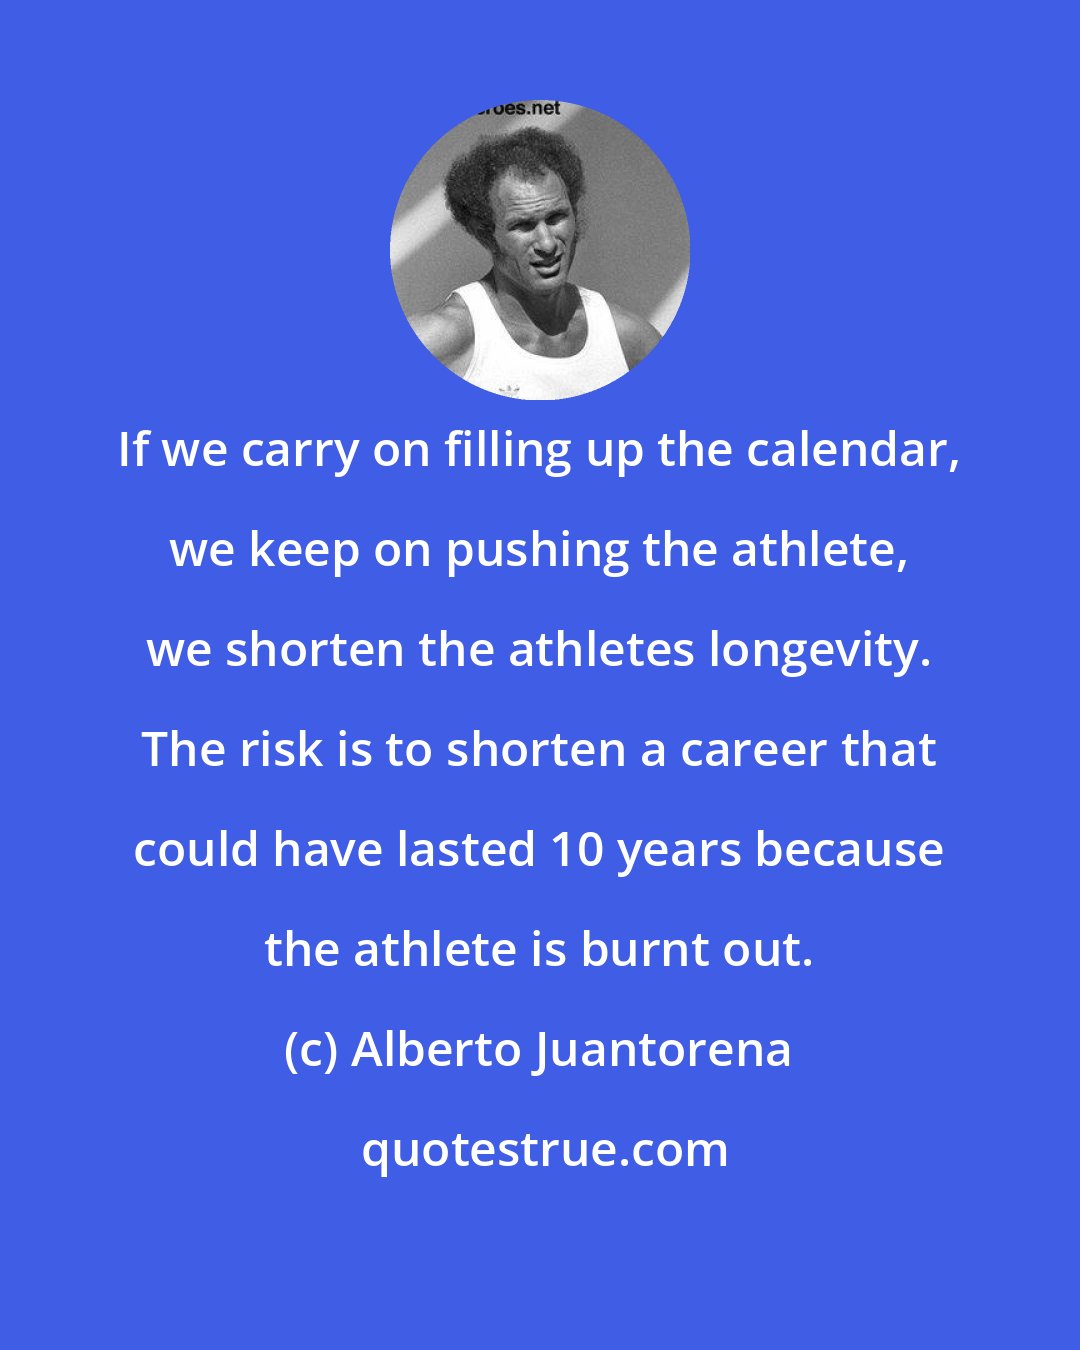 Alberto Juantorena: If we carry on filling up the calendar, we keep on pushing the athlete, we shorten the athletes longevity. The risk is to shorten a career that could have lasted 10 years because the athlete is burnt out.